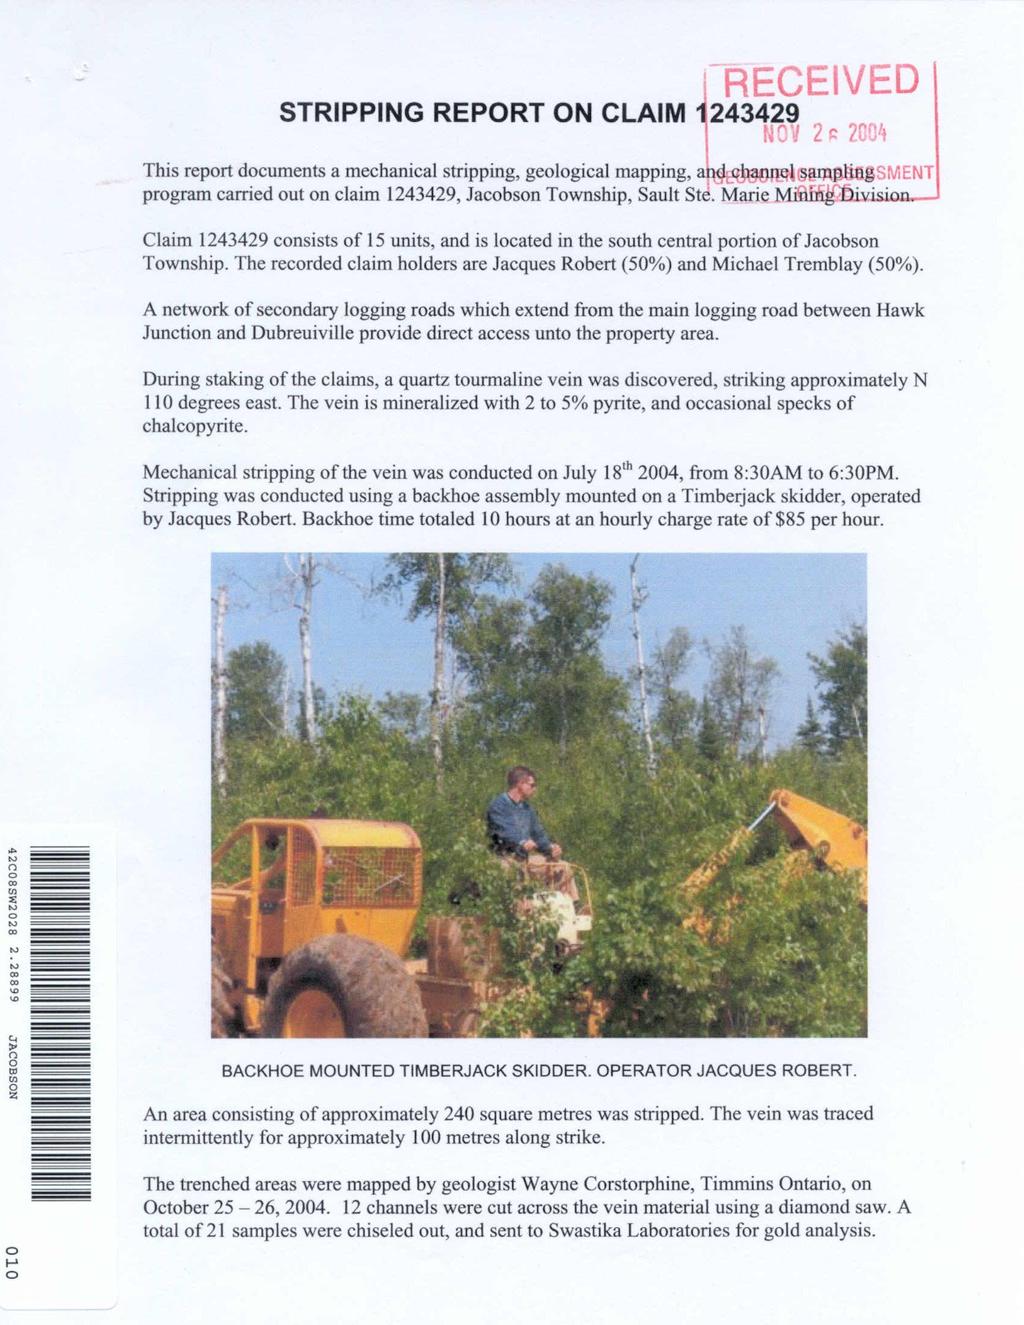 RFHEIVED STRIPPING REPORT ON CLAIM 243429 NOV 2 e 2CO'i This report documents a mechanical stripping, geological mapping, and channel samplingi program carried out on claim 243429, Jacobson Township,